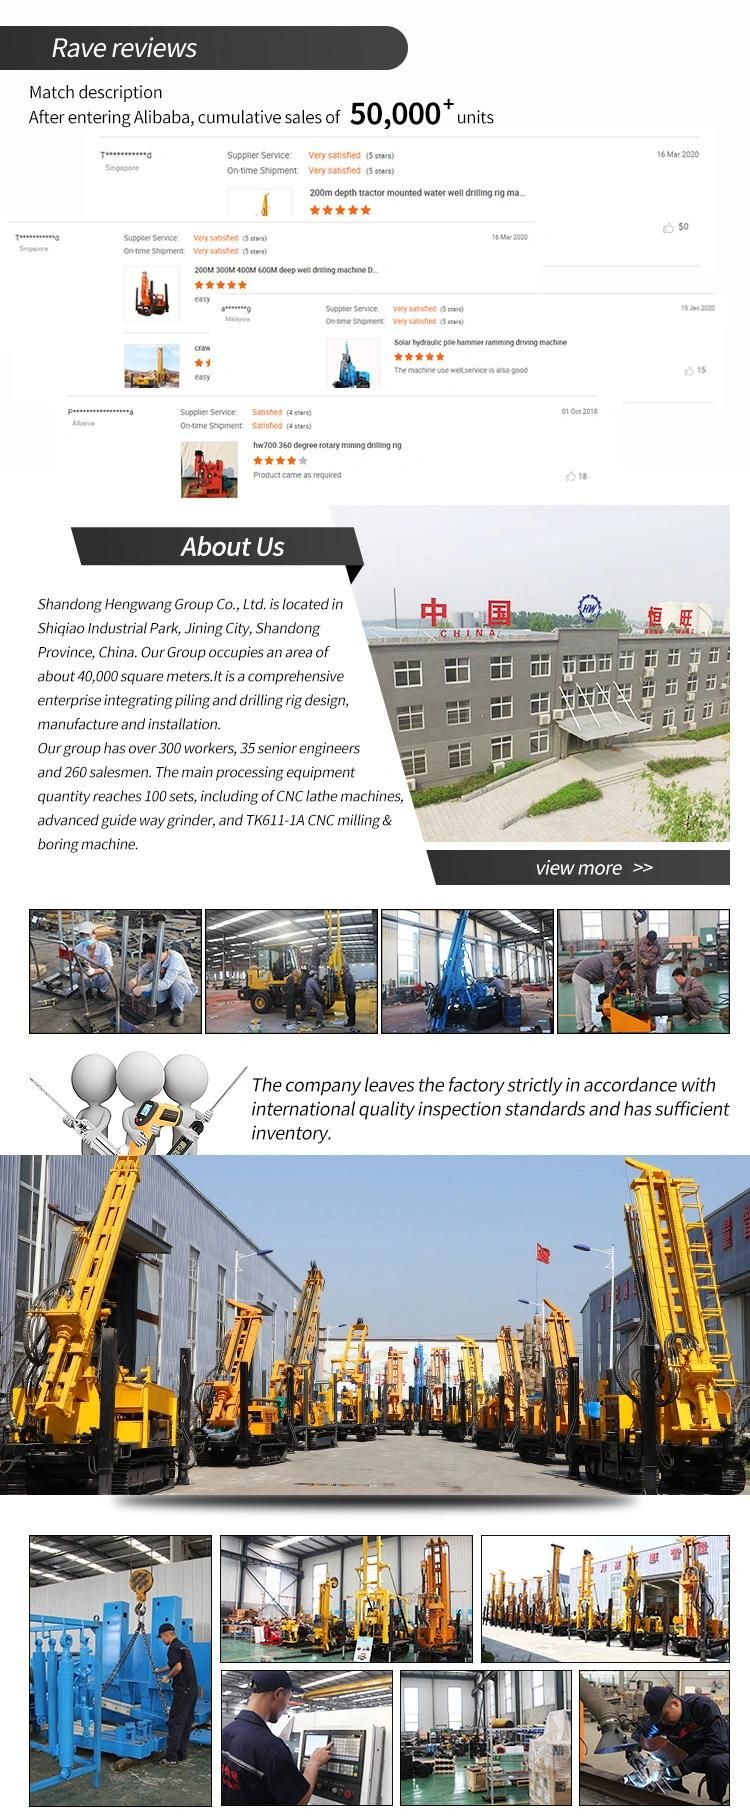 Top Drive Head Hydraulic Portable Borehole Water Well Drilling Rig Machine for Water Well